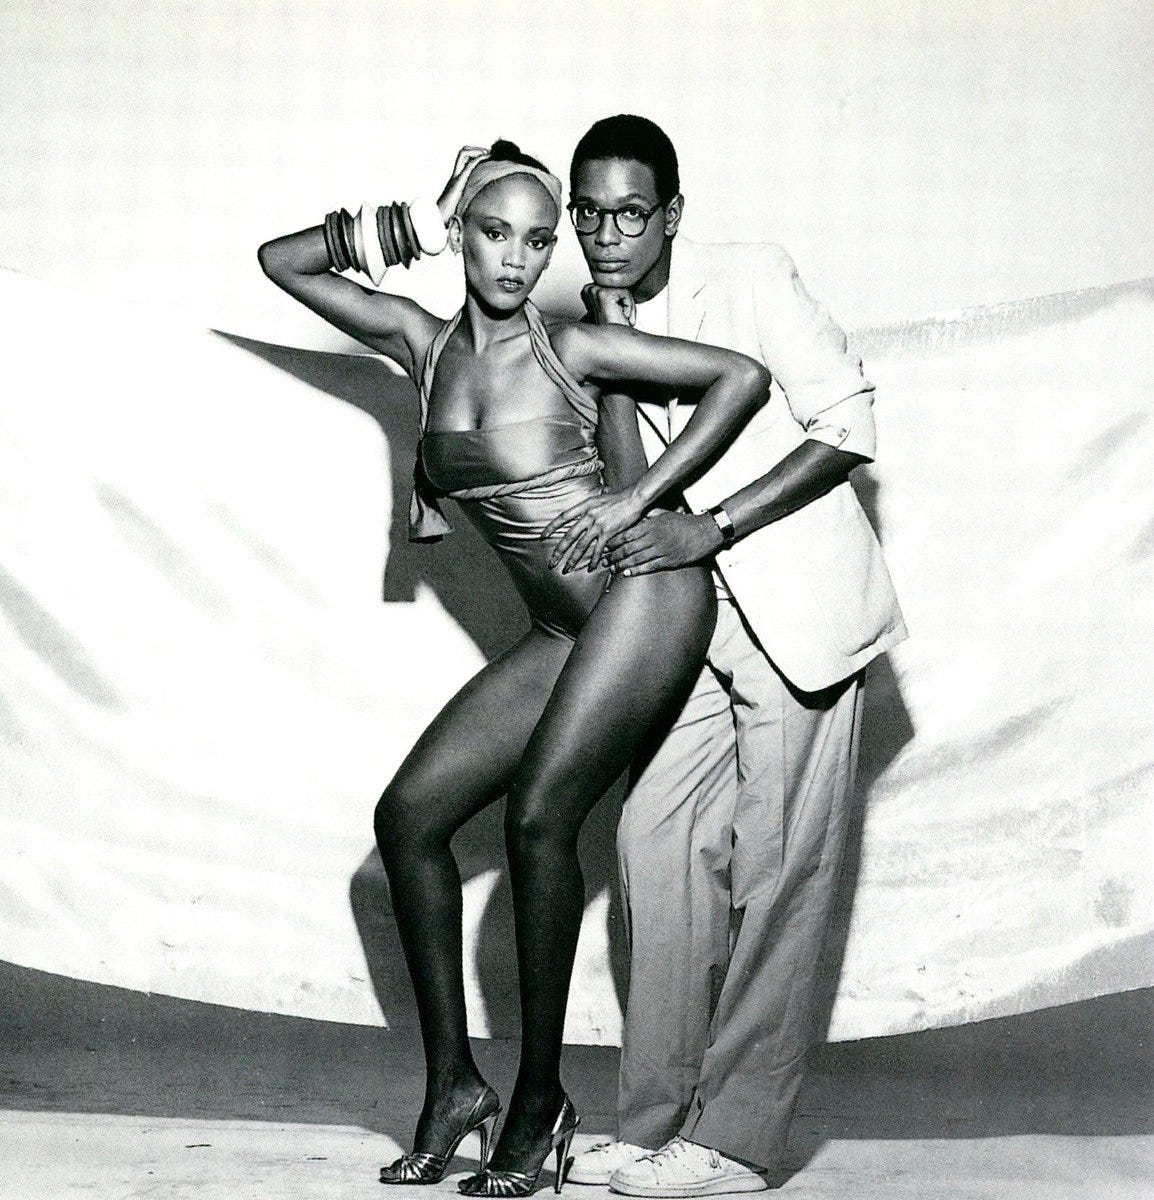 archivealive a Twitter: "Designer Willi Donnell Smith posing with his  supermodel/actress sister Toukie Smith photographed by Anthony Barboza  (1978) | In 1987, Willi Smith was declared as indisputably, “the most  successful black